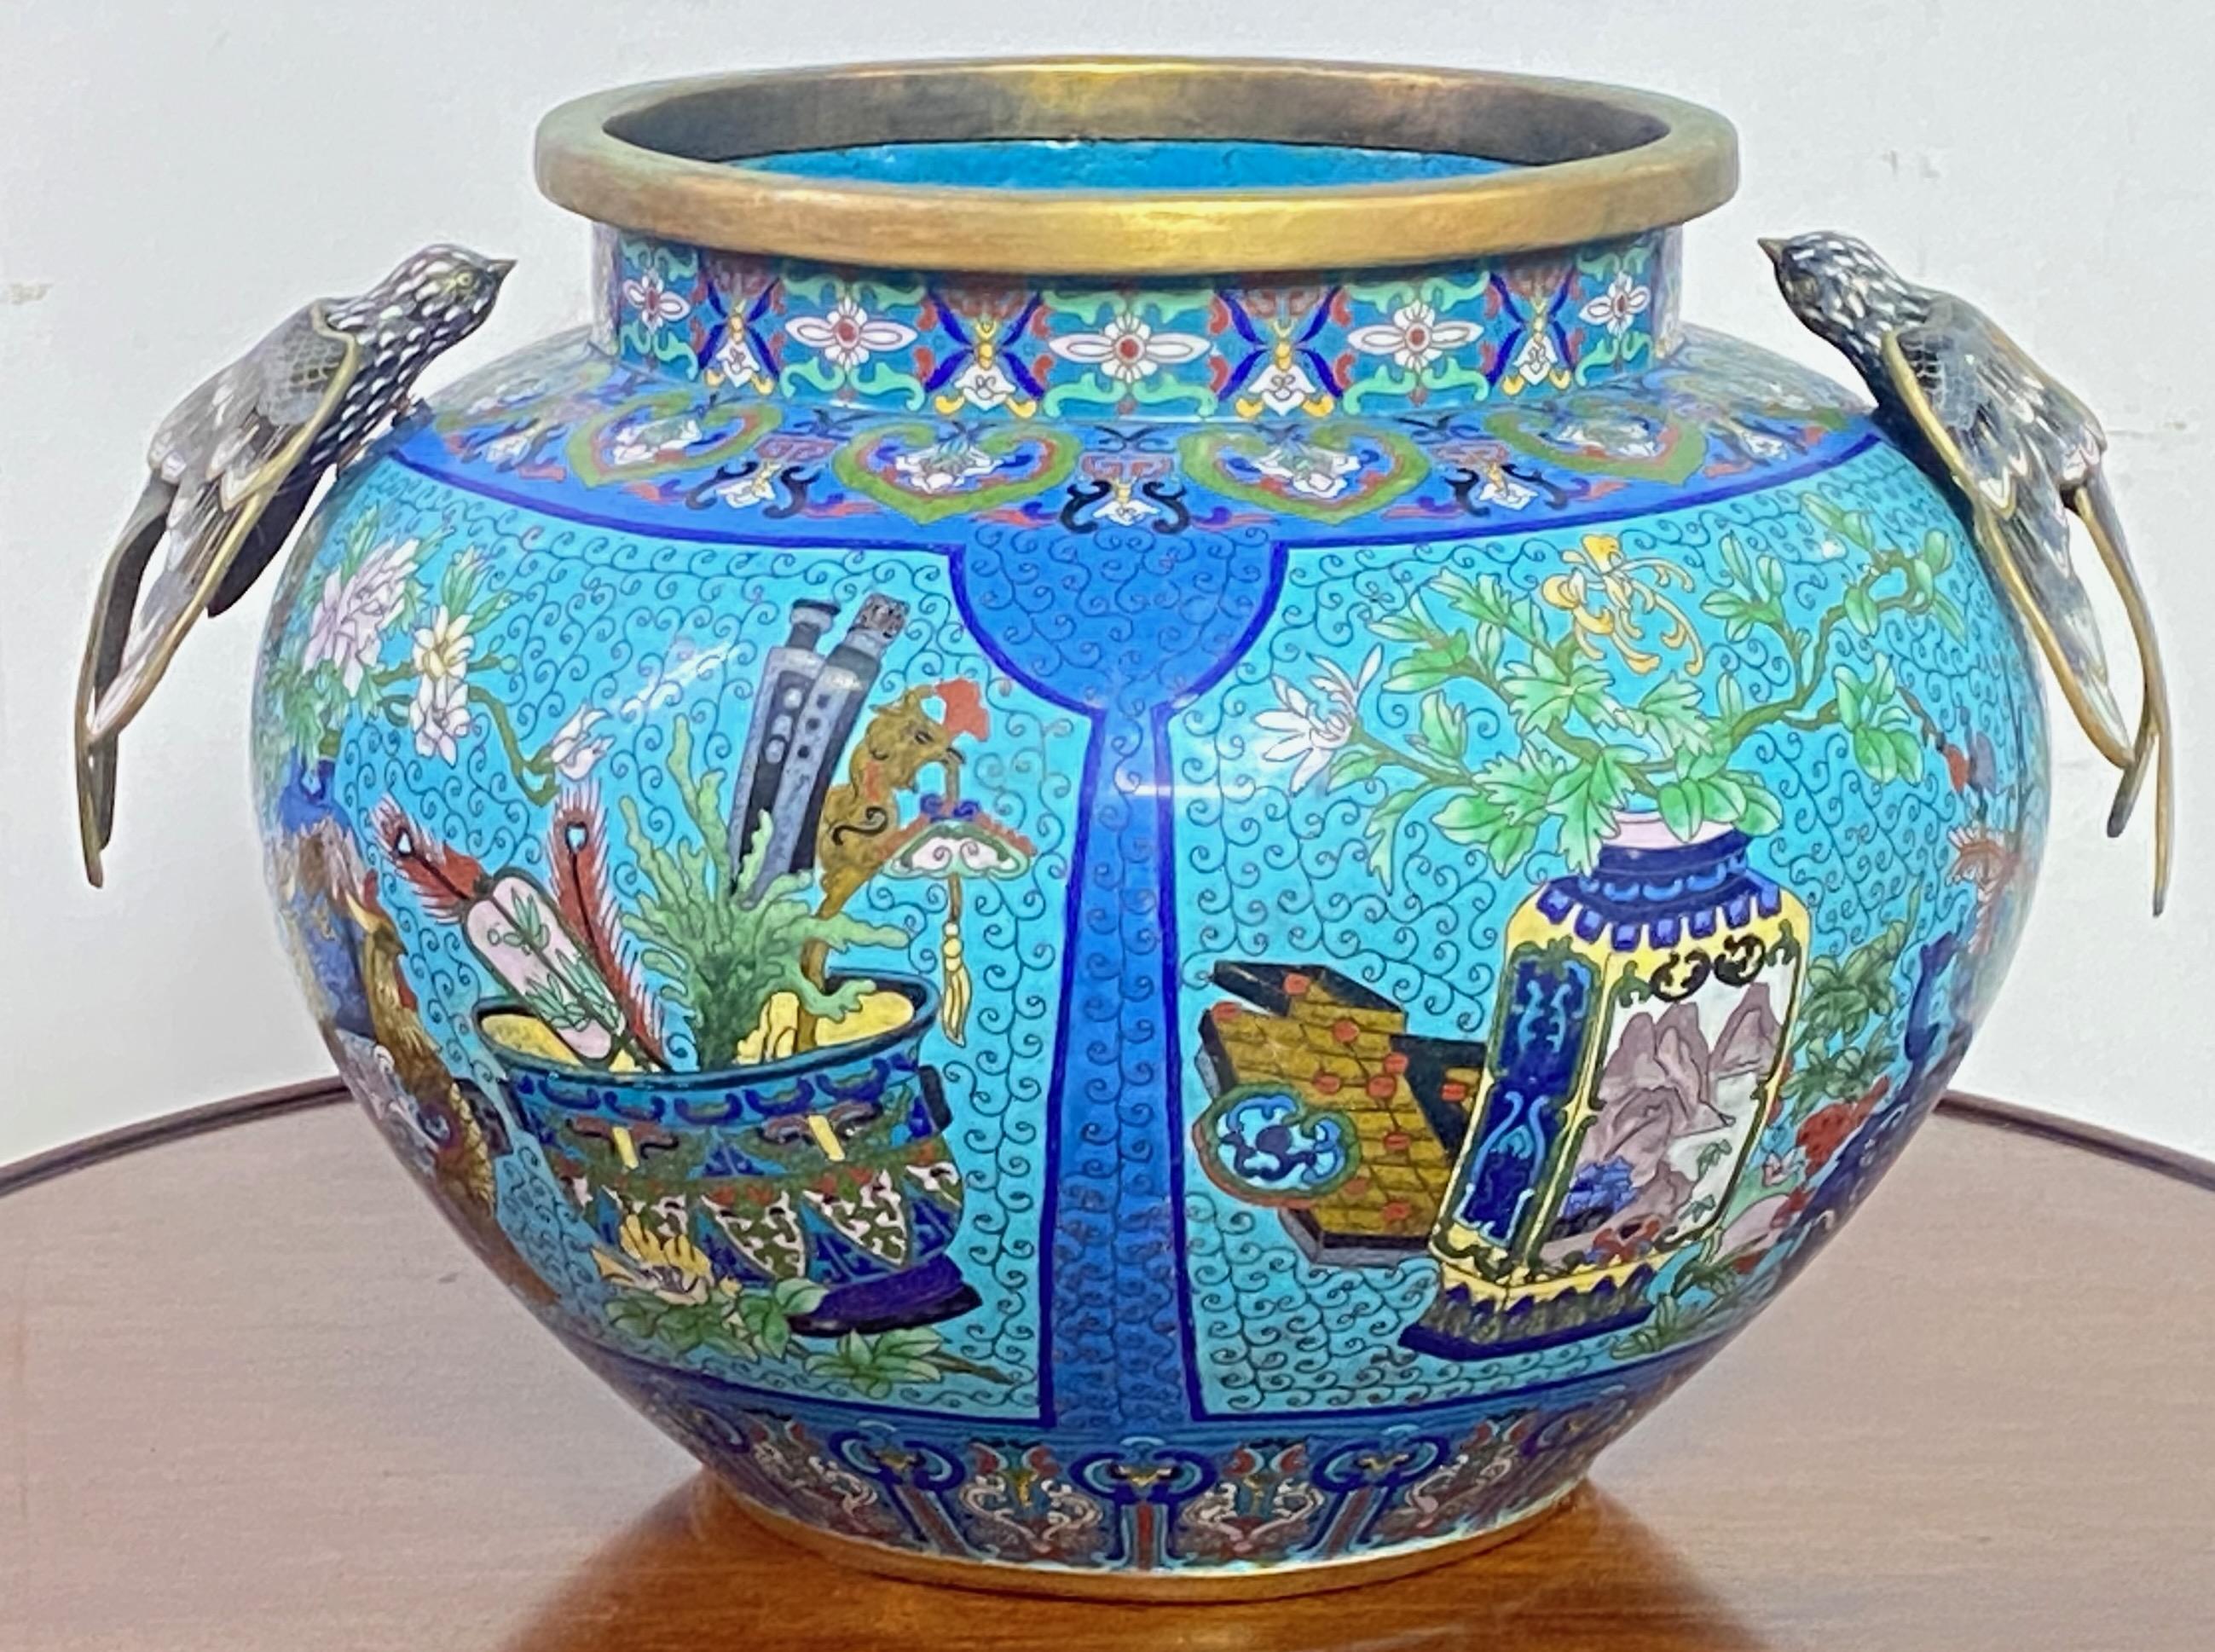 A large exceptional antique Chinese cloisonne pot or urn. Showing a very detailed hand crafted work of enameled art with flowers and animal designs around the pot. On each shoulder, there is a beautiful detailed cloisonne bird.
In remarkable antique